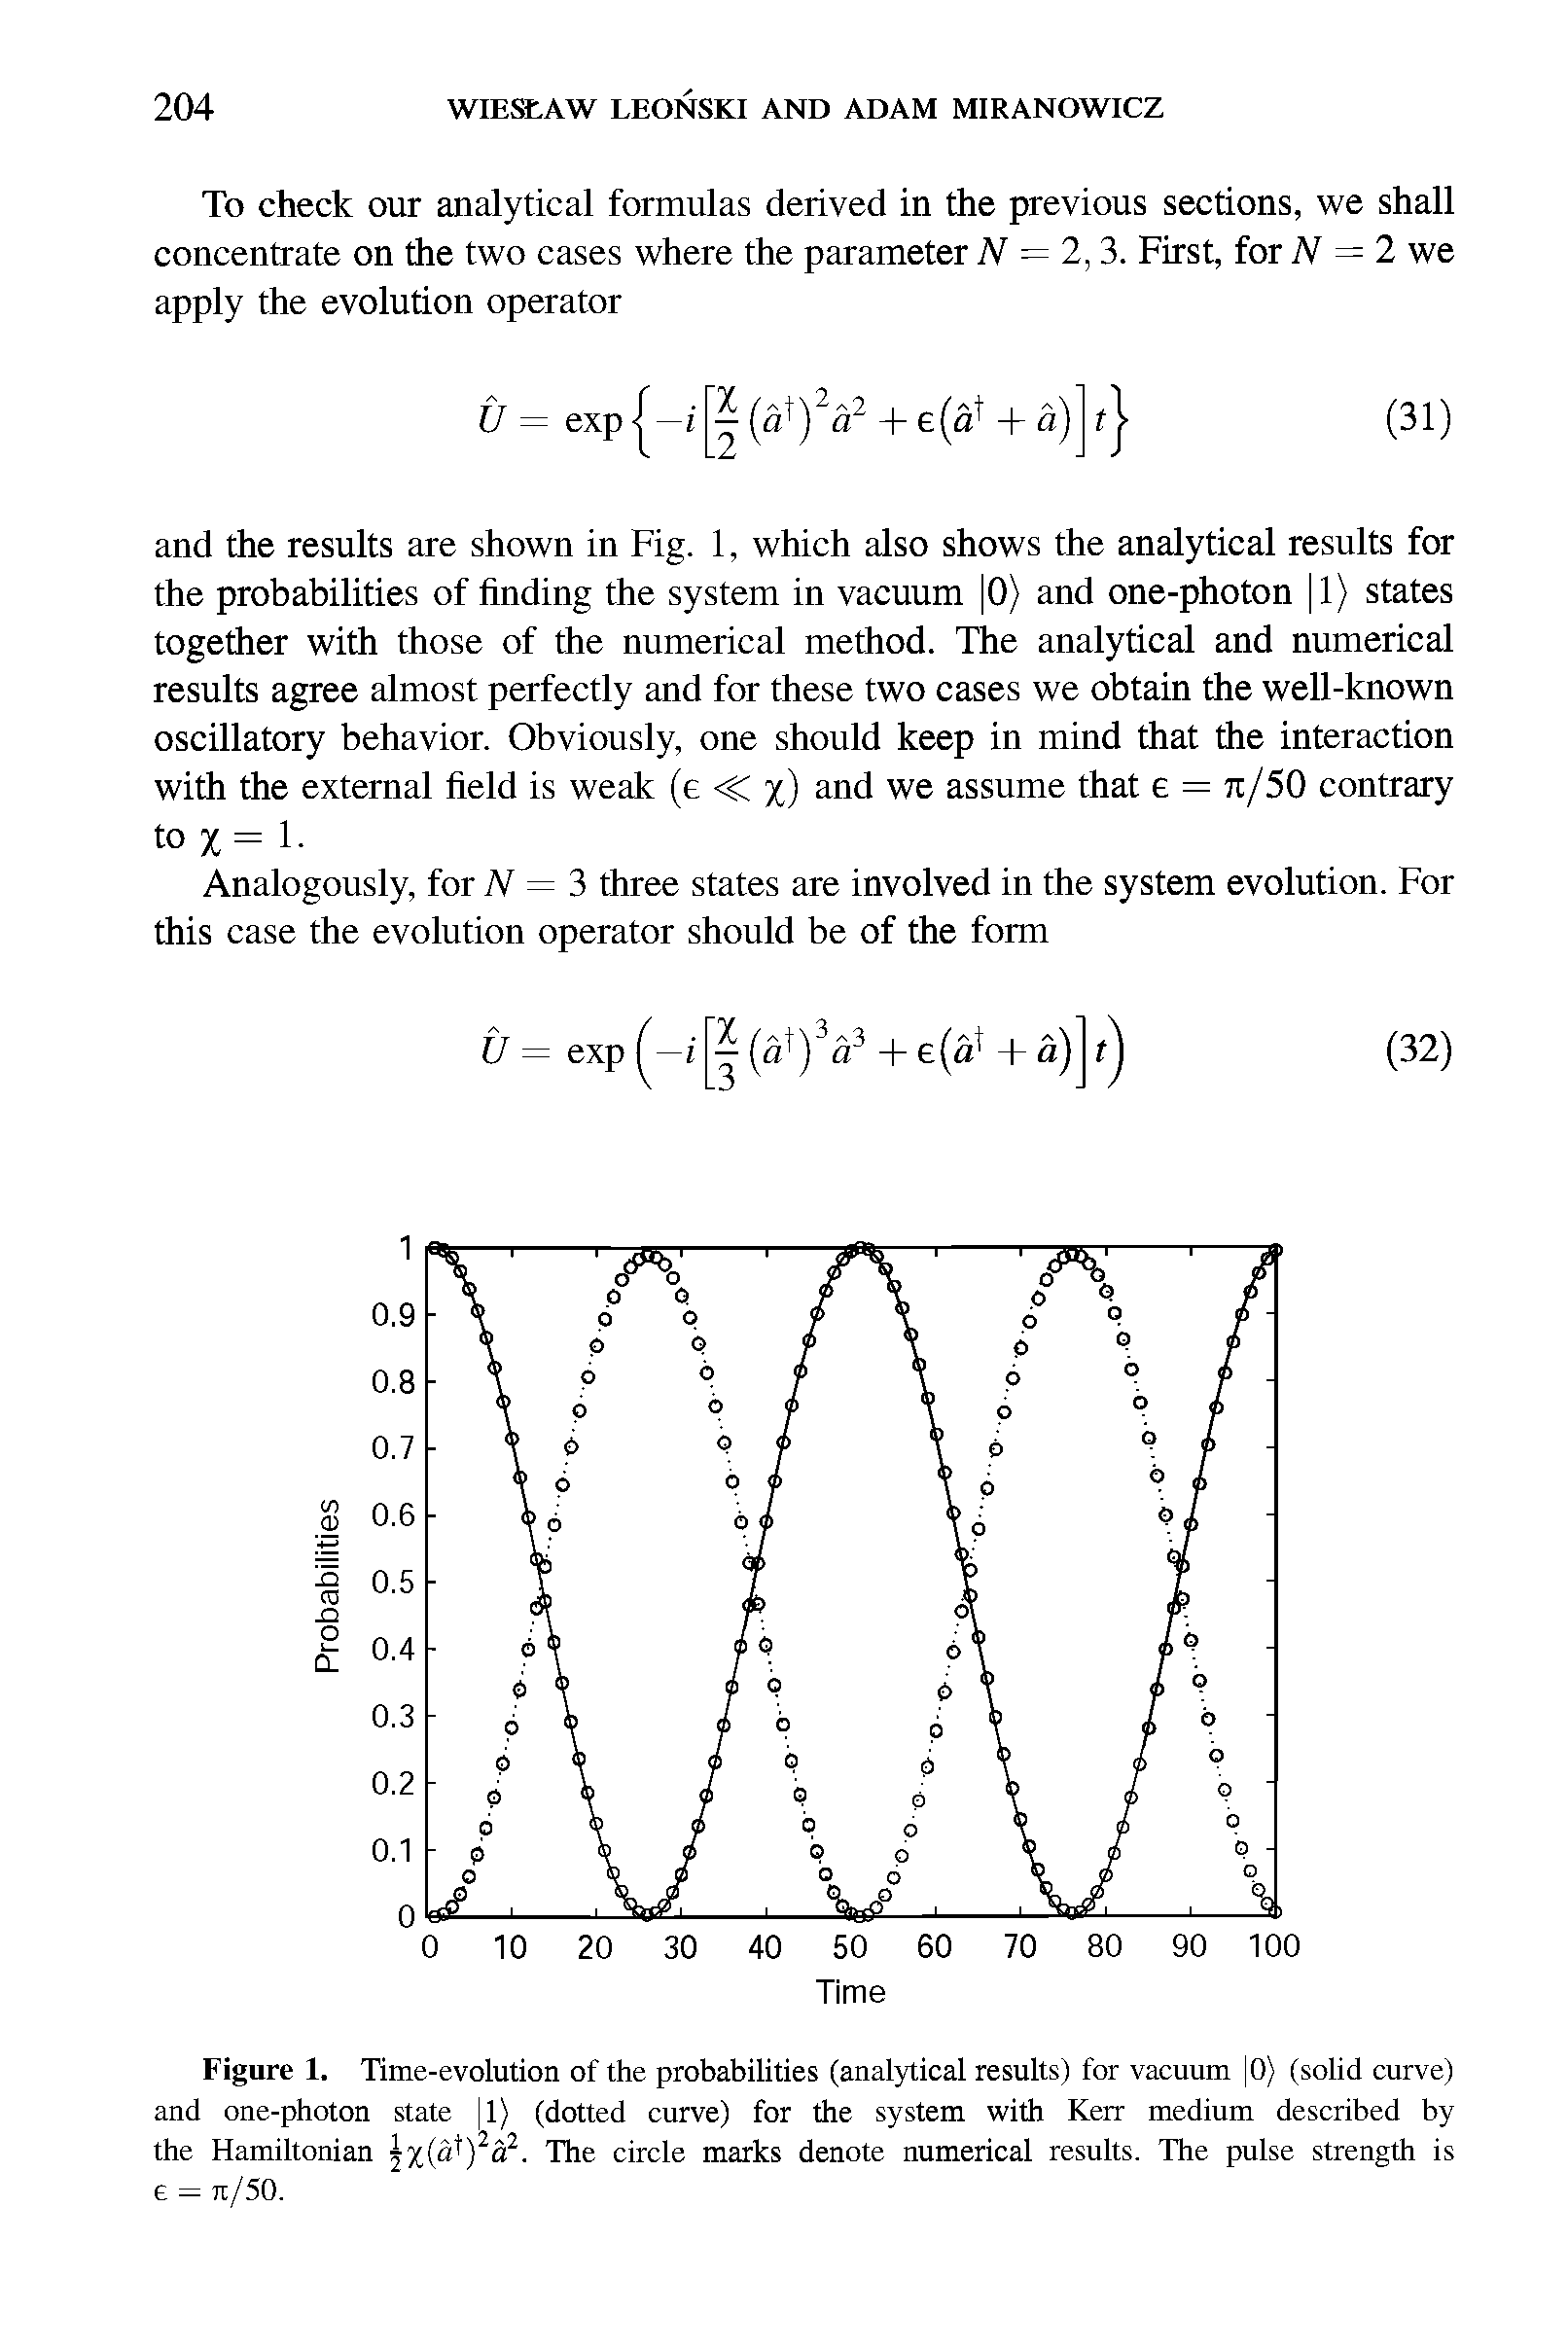 Figure 1. Time-evolution of the probabilities (analytical results) for vacuum 0) (solid curve) and one-photon state 1) (dotted curve) for the system with Kerr medium described by the Hamiltonian j%(di)2a2. The circle marks denote numerical results. The pulse strength is e = ti/50.